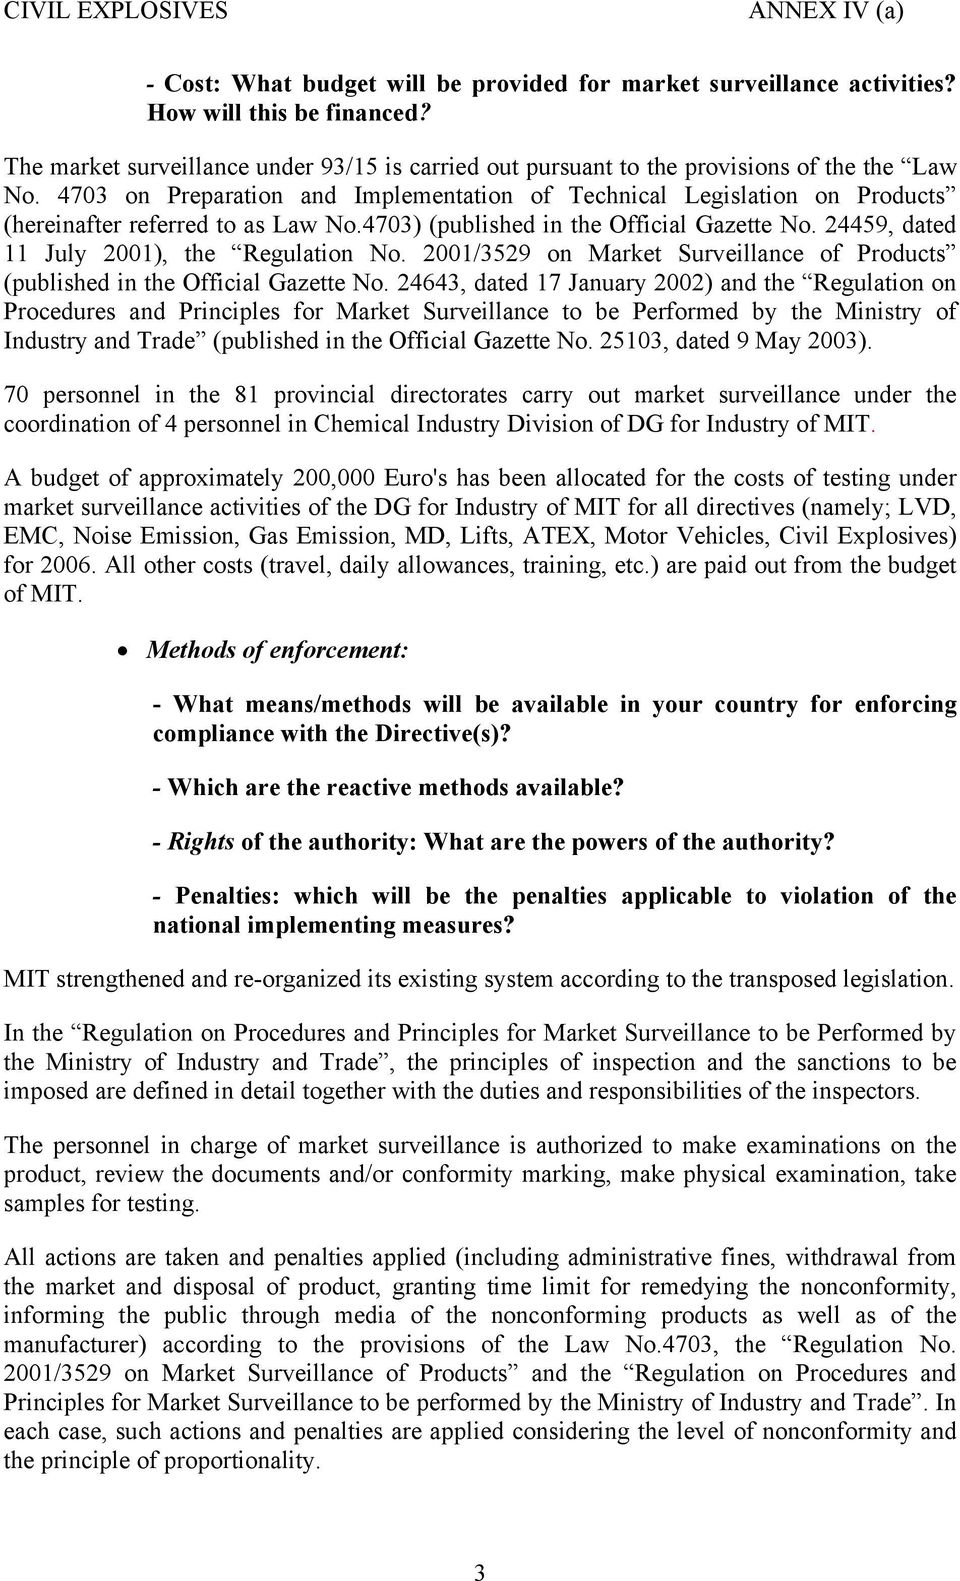 24459, dated 11 July 2001), the Regulation No. 2001/3529 on Market Surveillance of Products (published in the Official Gazette No.